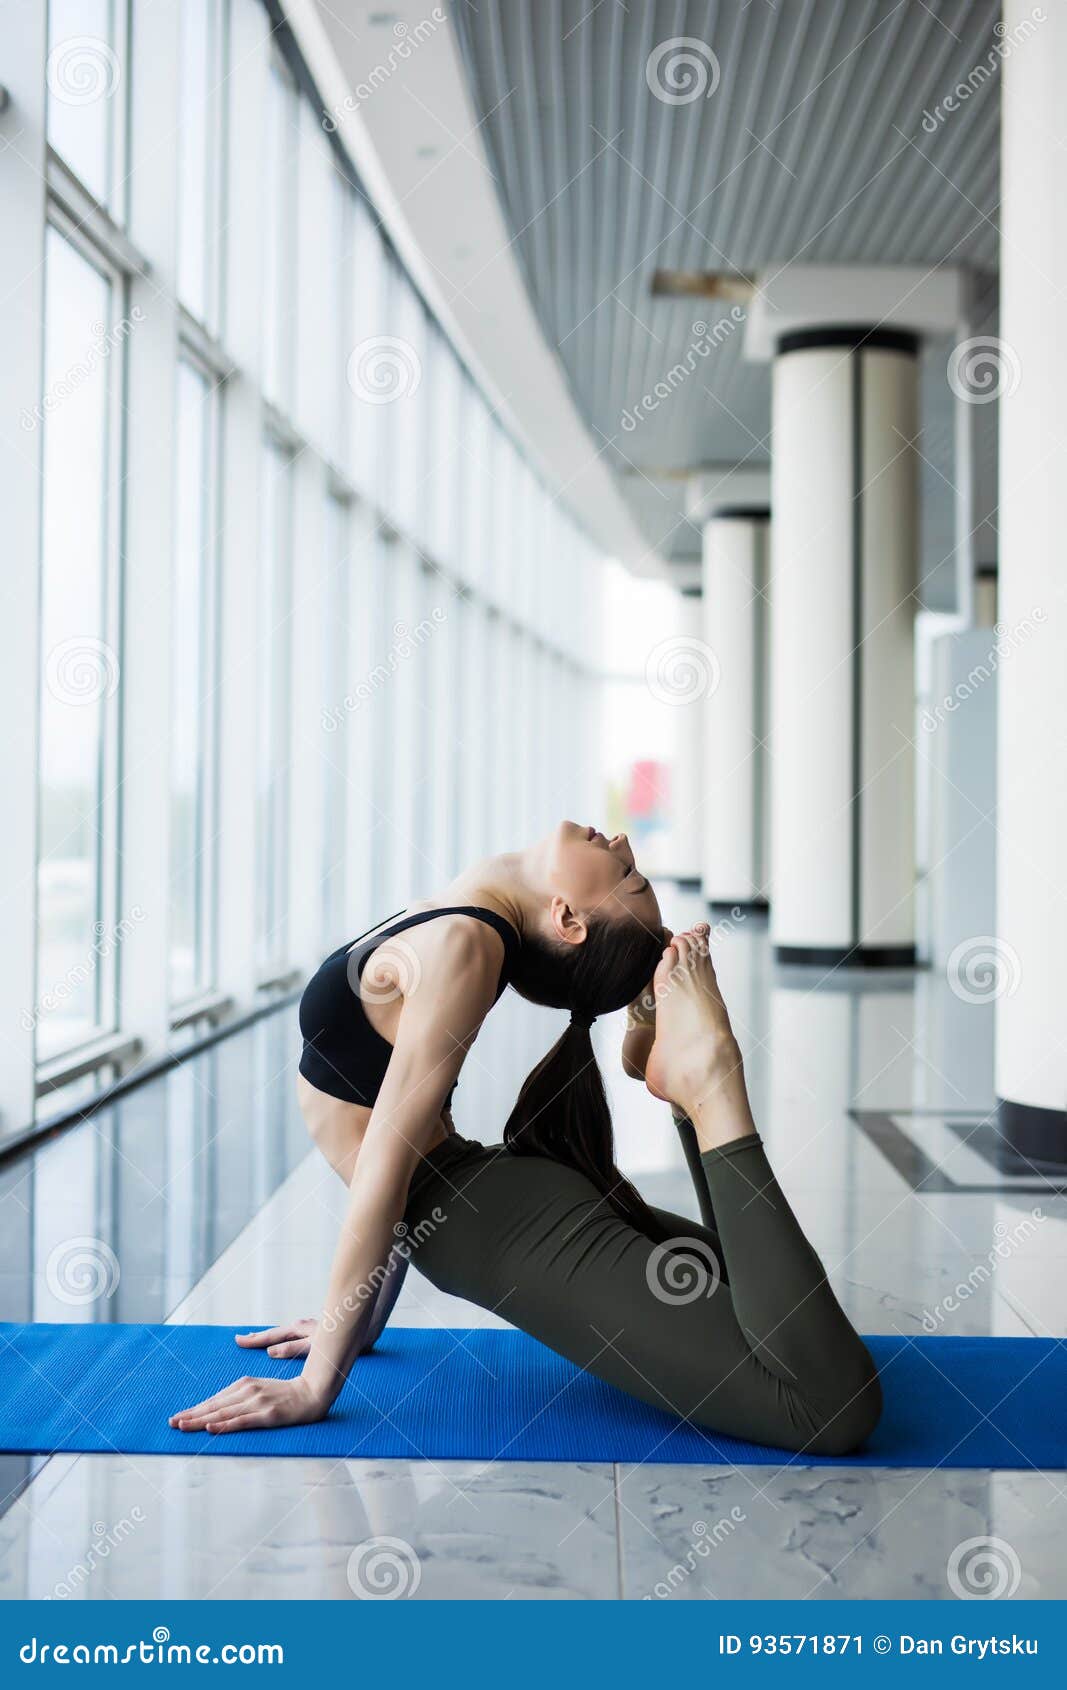 one-legged king pigeon pose. woman yoga practice pose training concept in gym hall with big windows